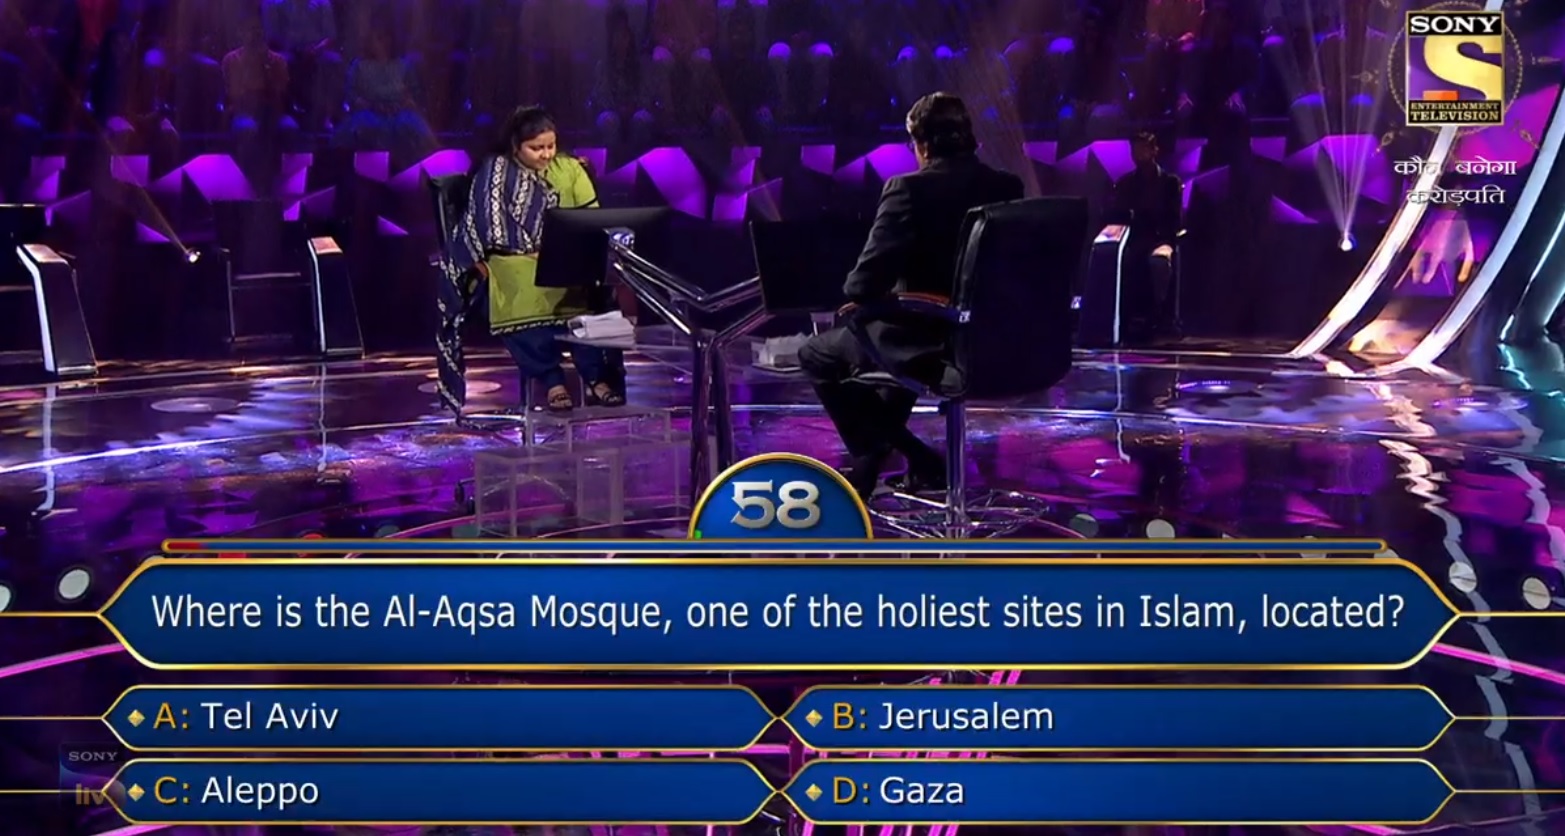 Ques : Where is the Al-Aqsa Mosque, one of the holiest sites in Islam, located?